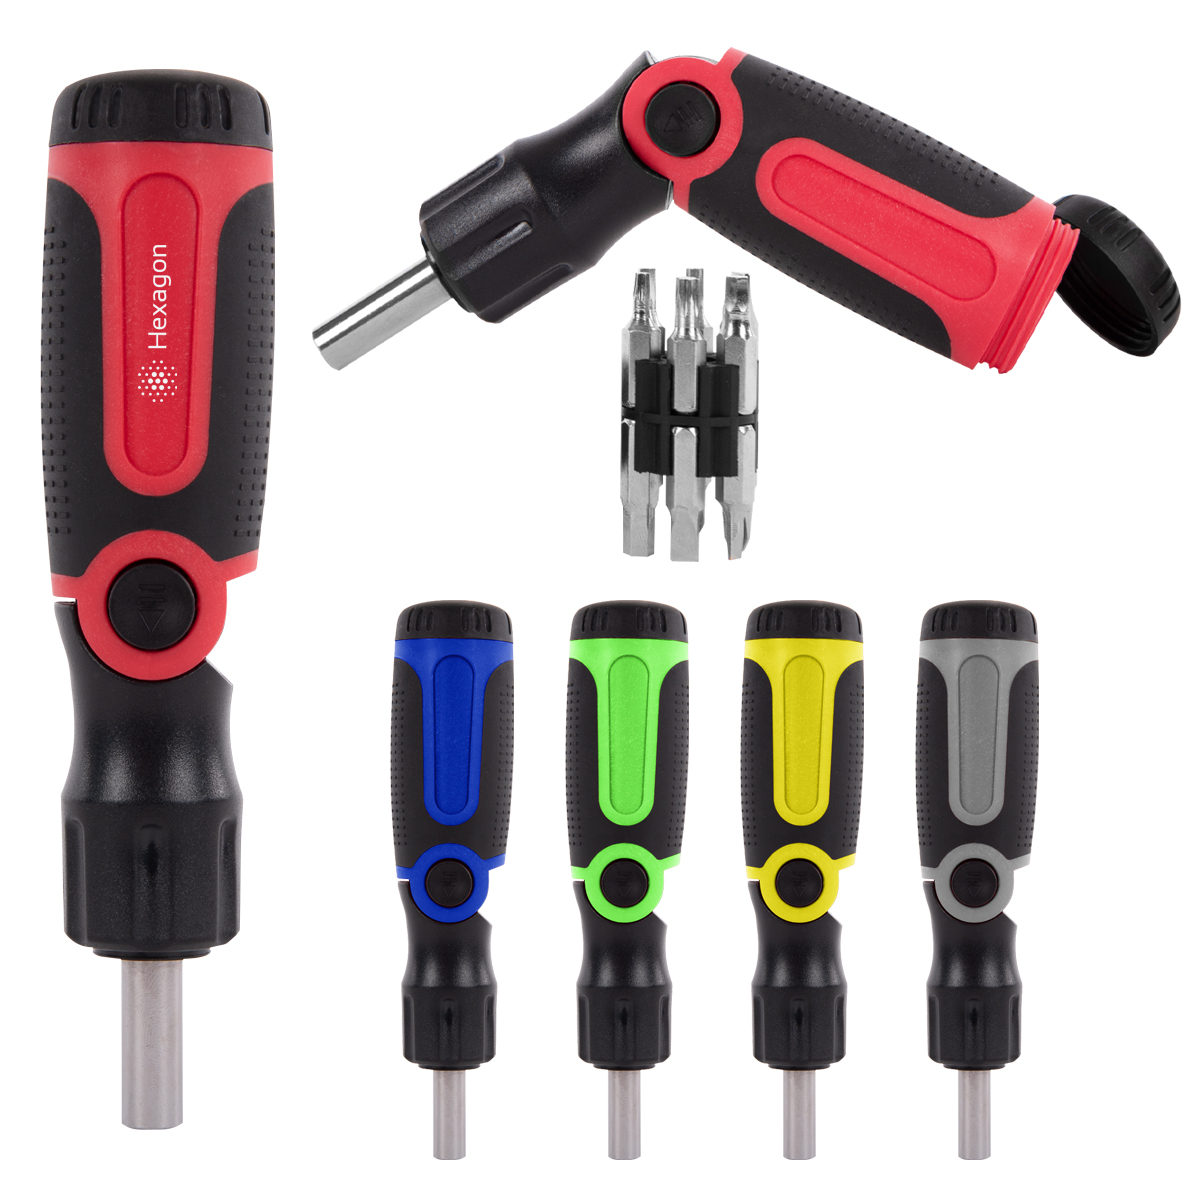 Multi-Angle Screwdriver with Insert Bits